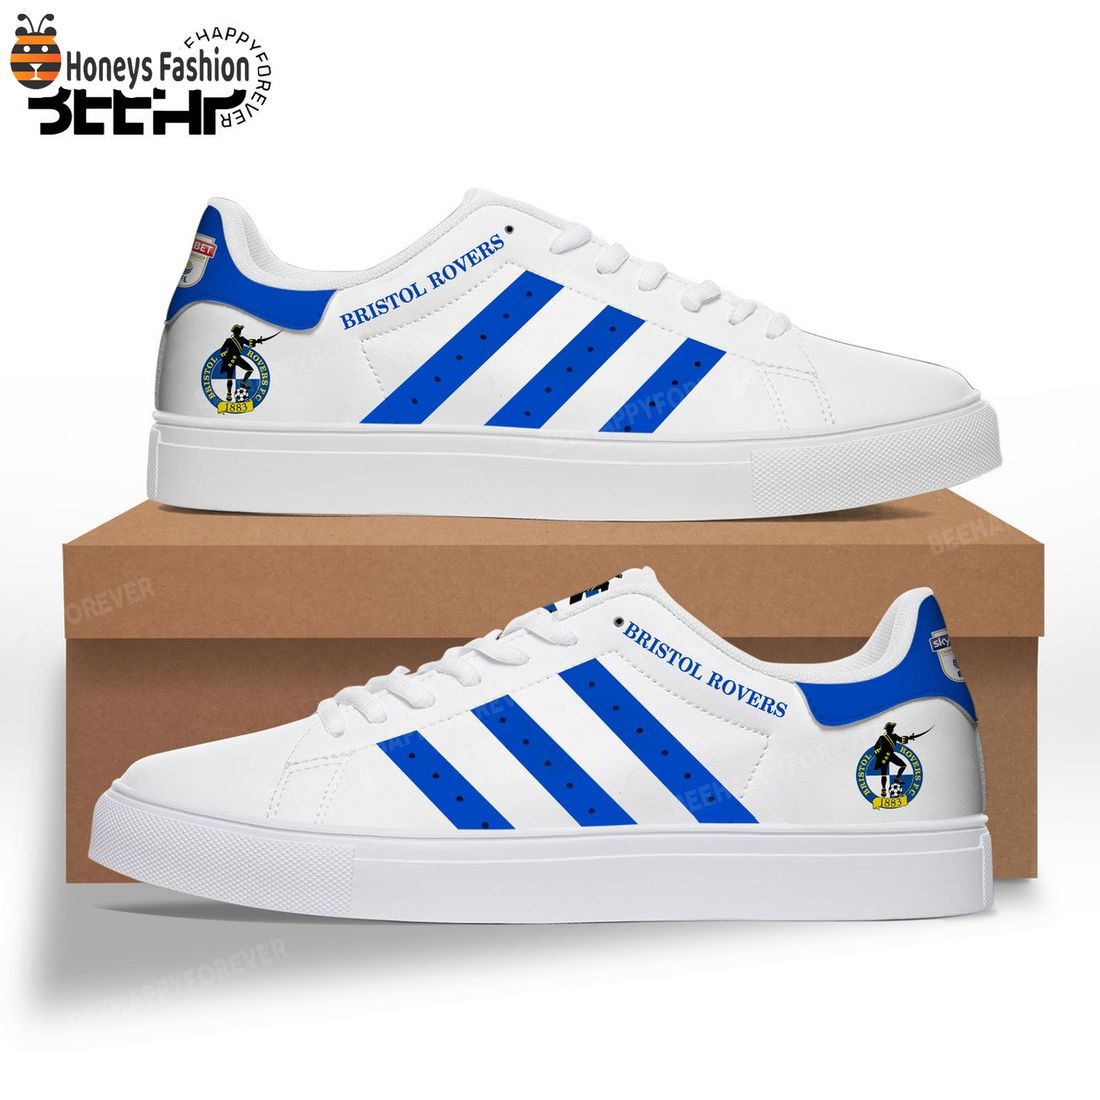 Bristol Rovers Stan Smith Adidas Shoes